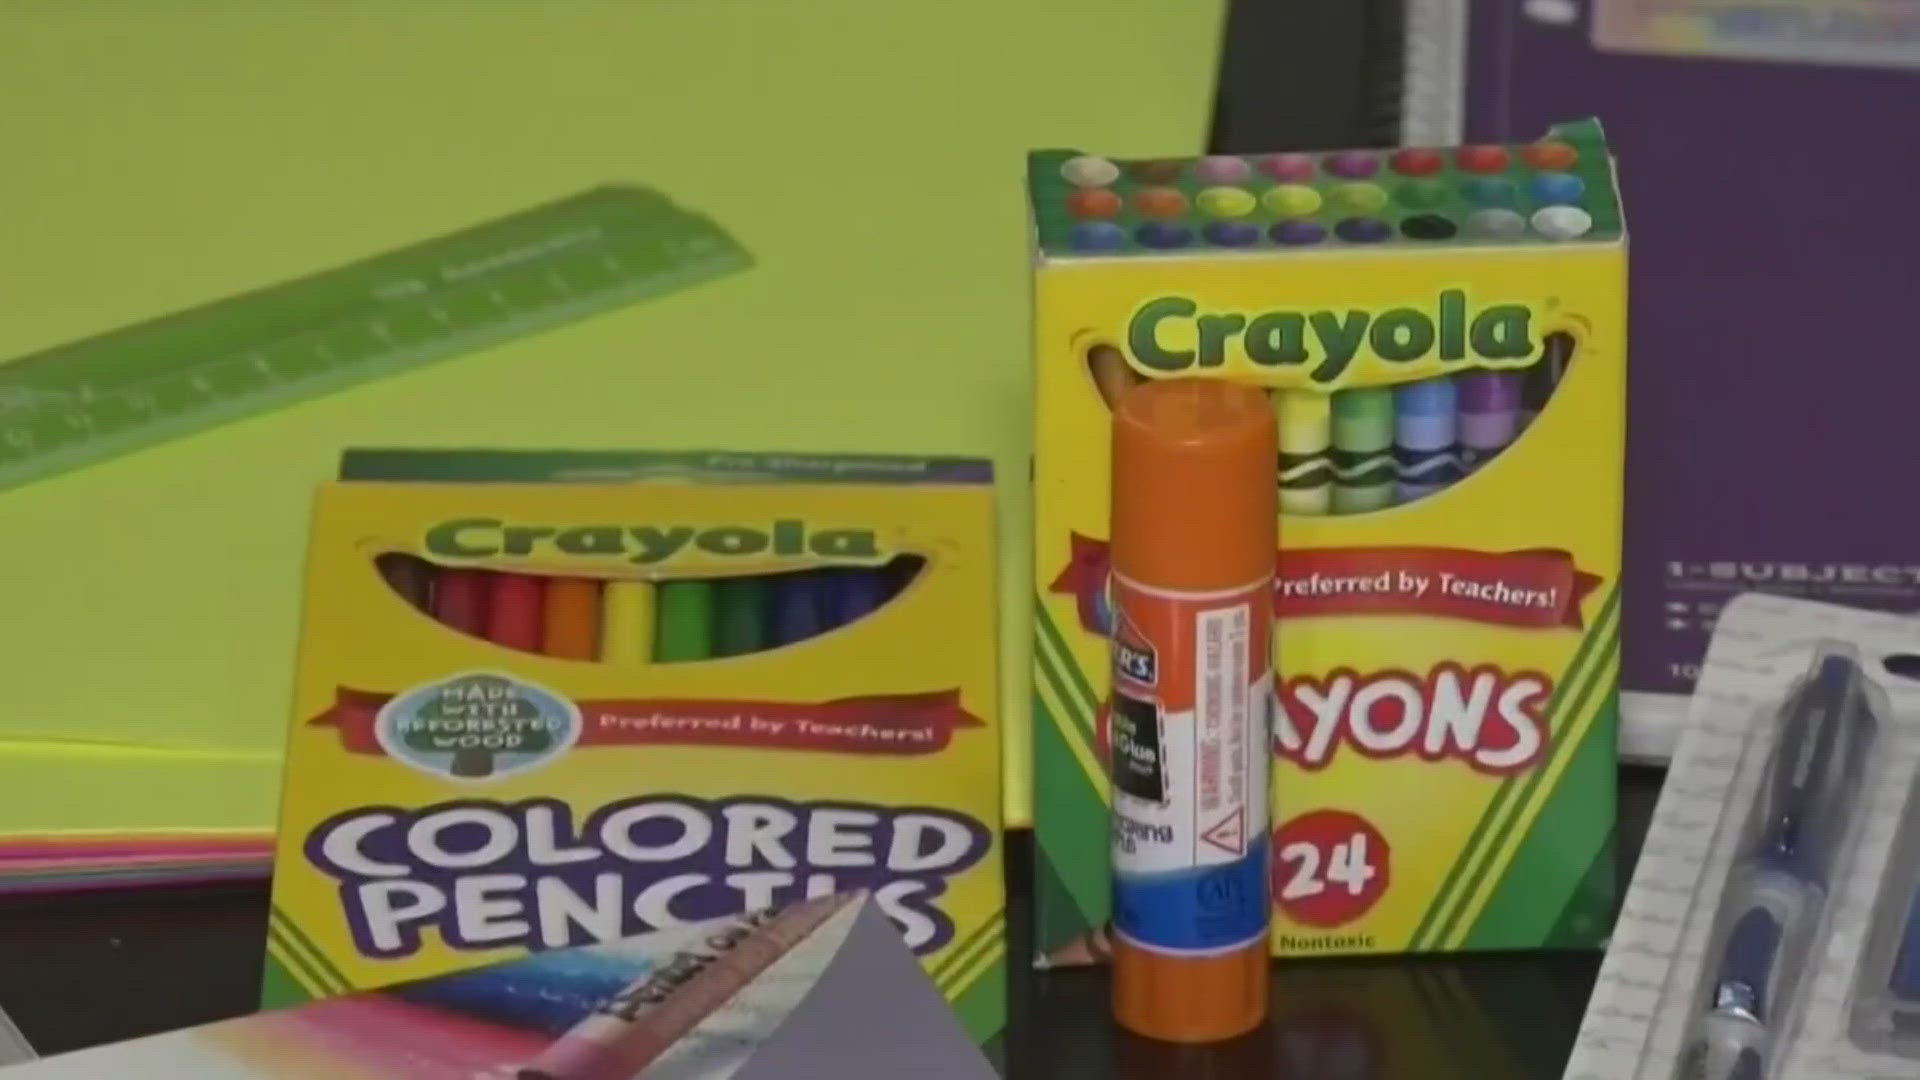 The organization will be collecting school supplies for local families through July 17.